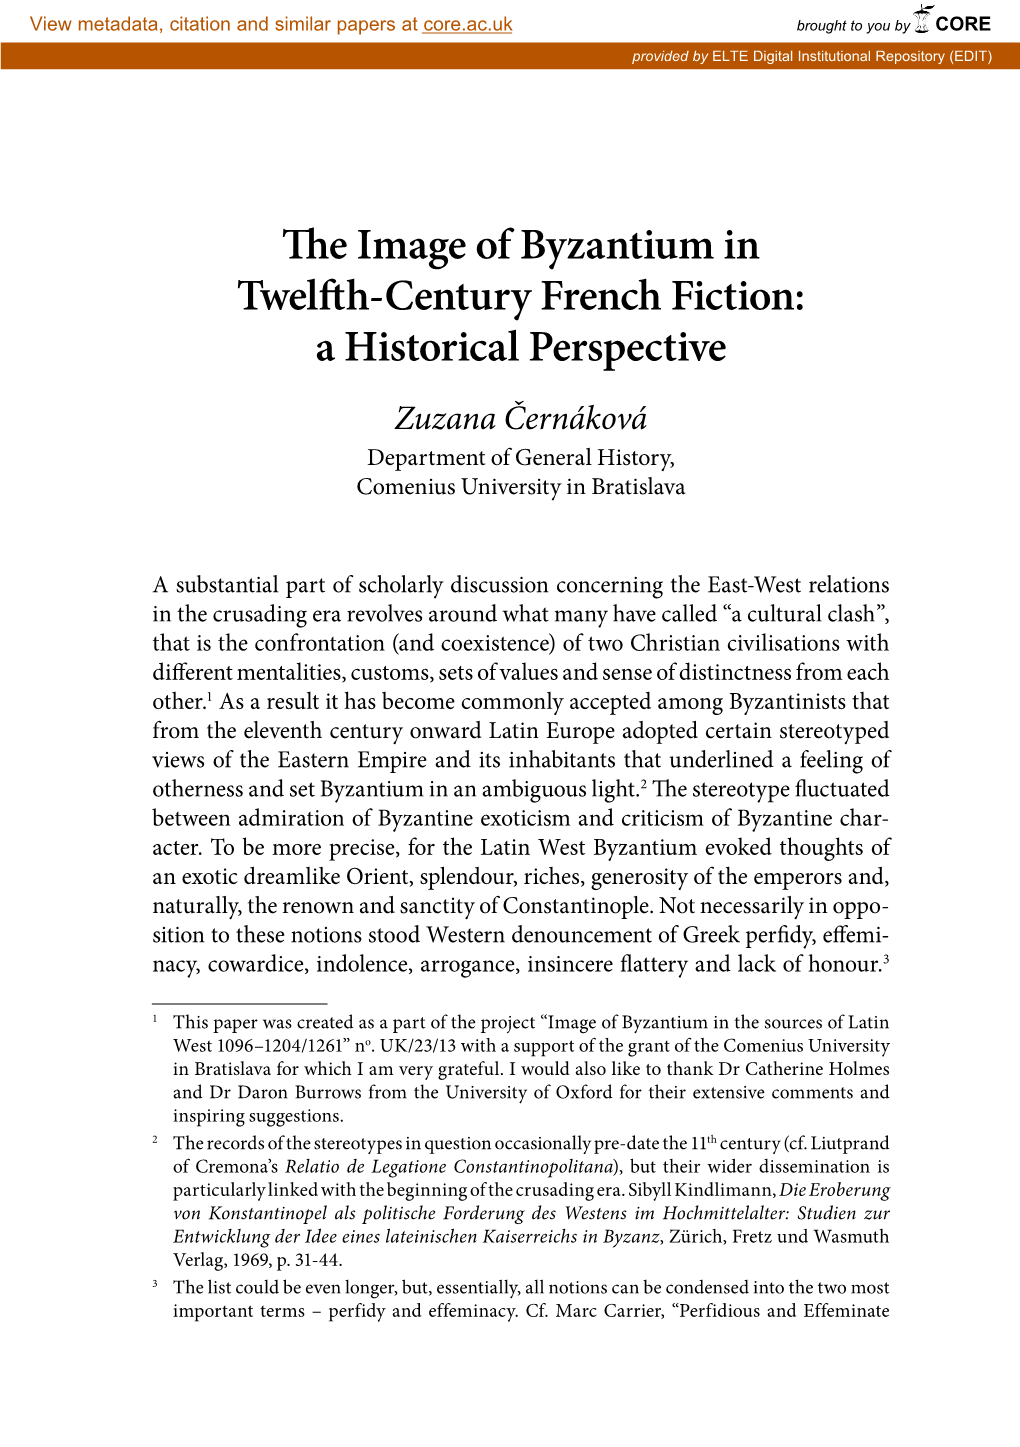 The Image of Byzantium in Twelfth-Century French